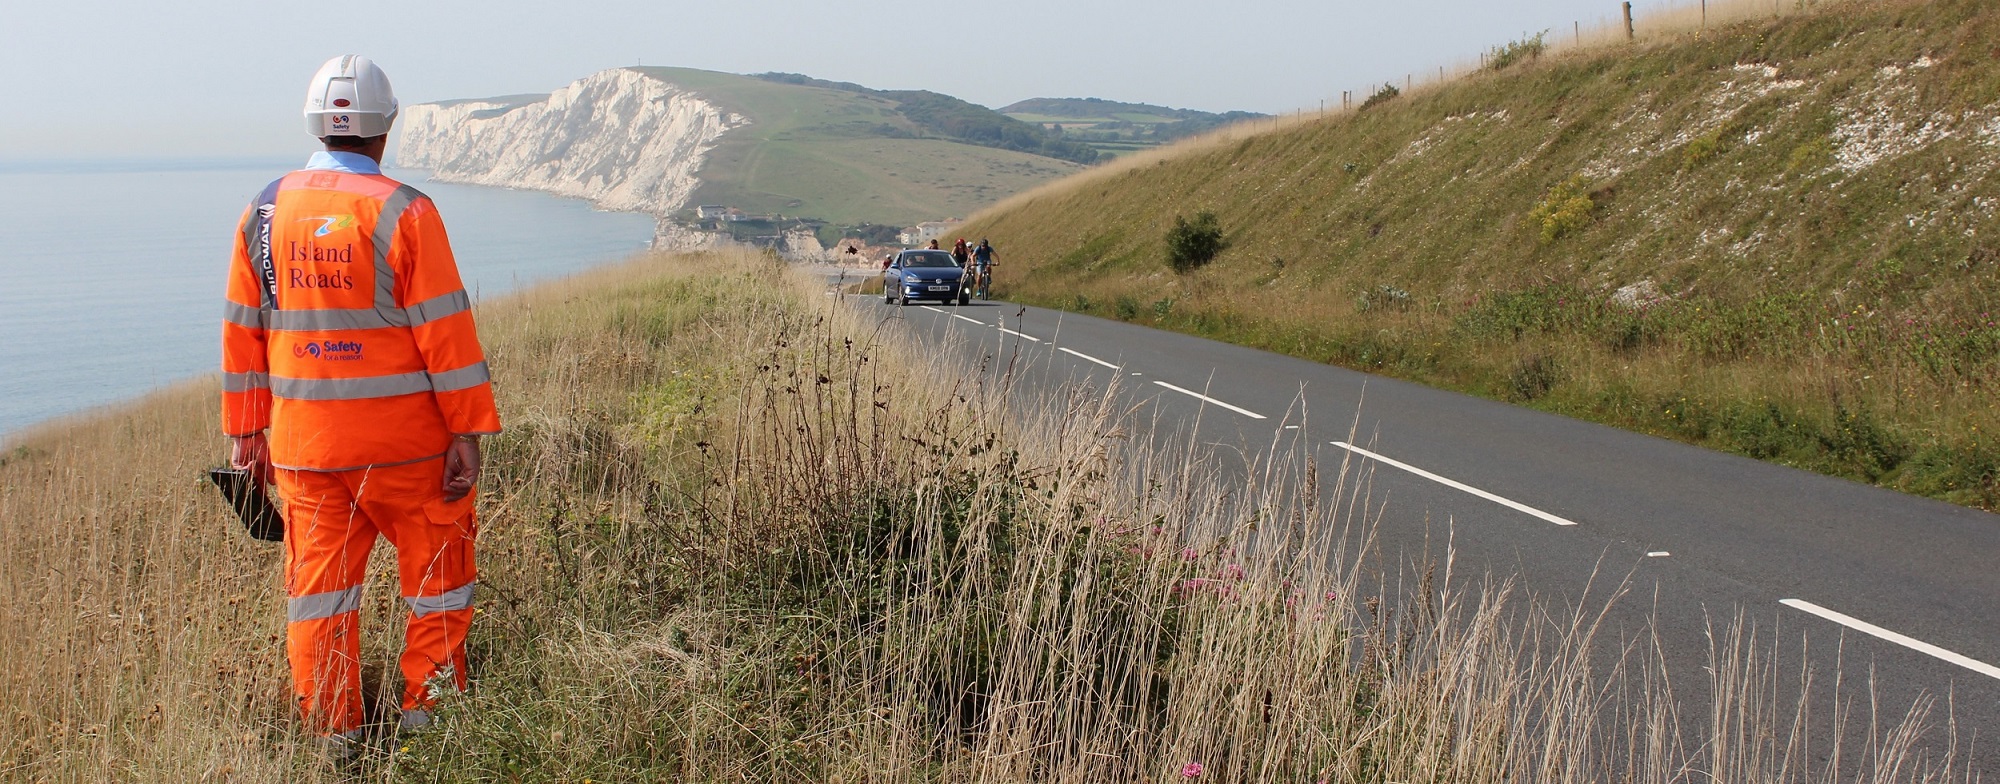 district steward (man) standing by road overlooking Freshwater Bay